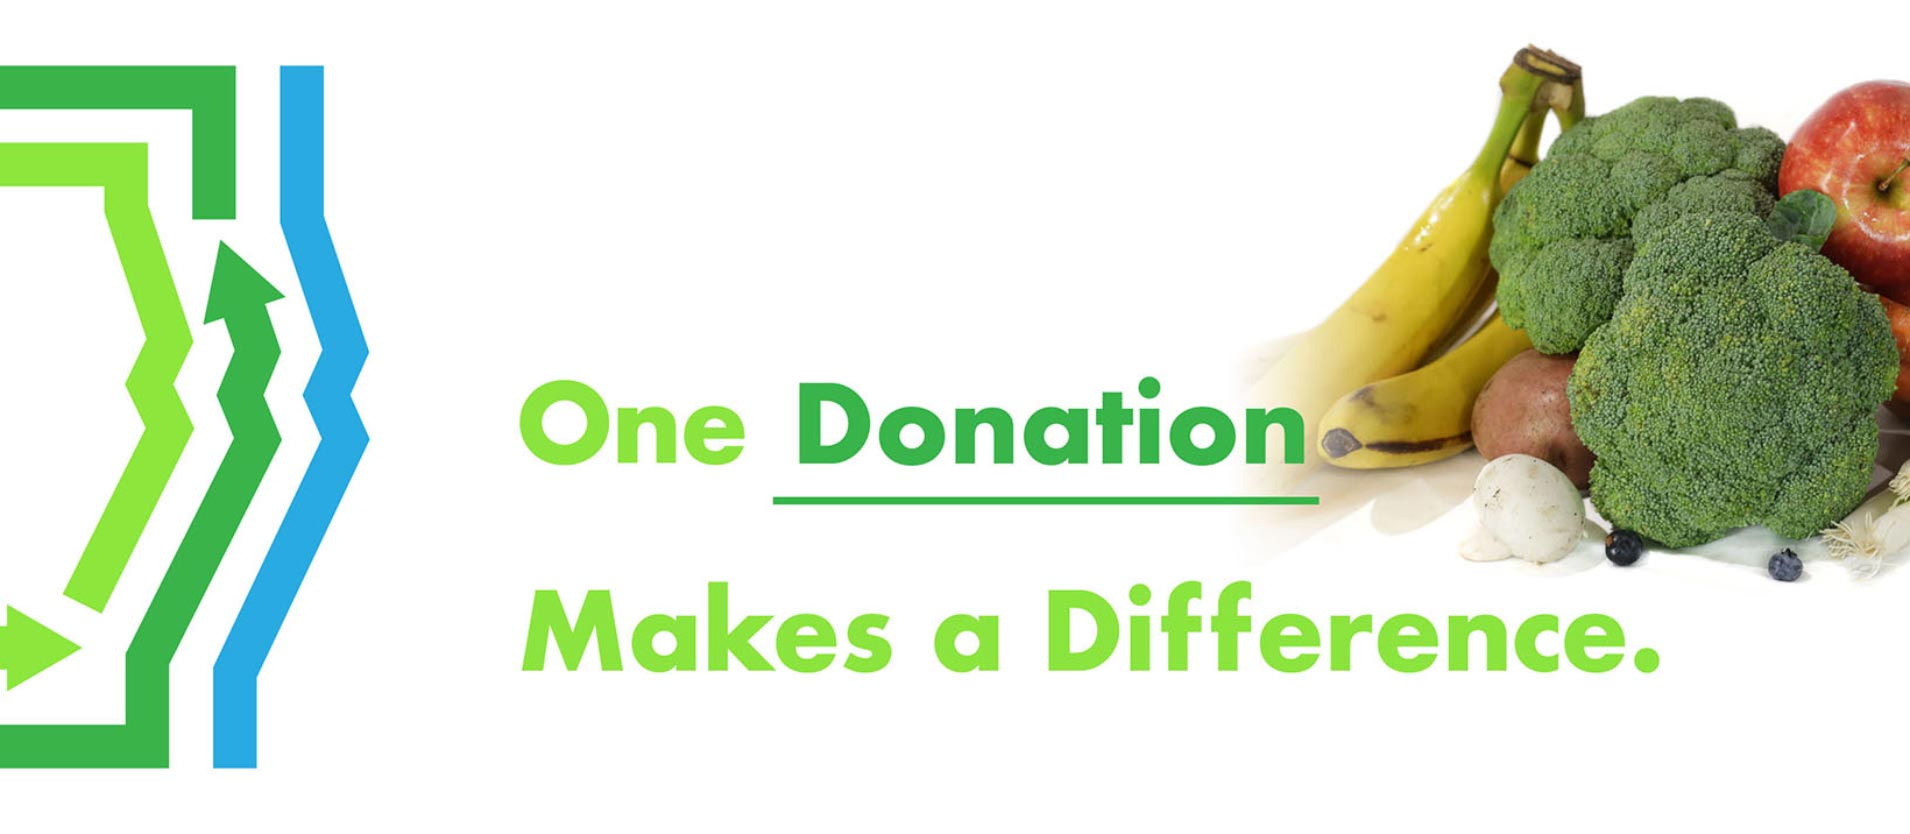 SCFB-Donate-Makes-Difference-1910x834_c_optimised